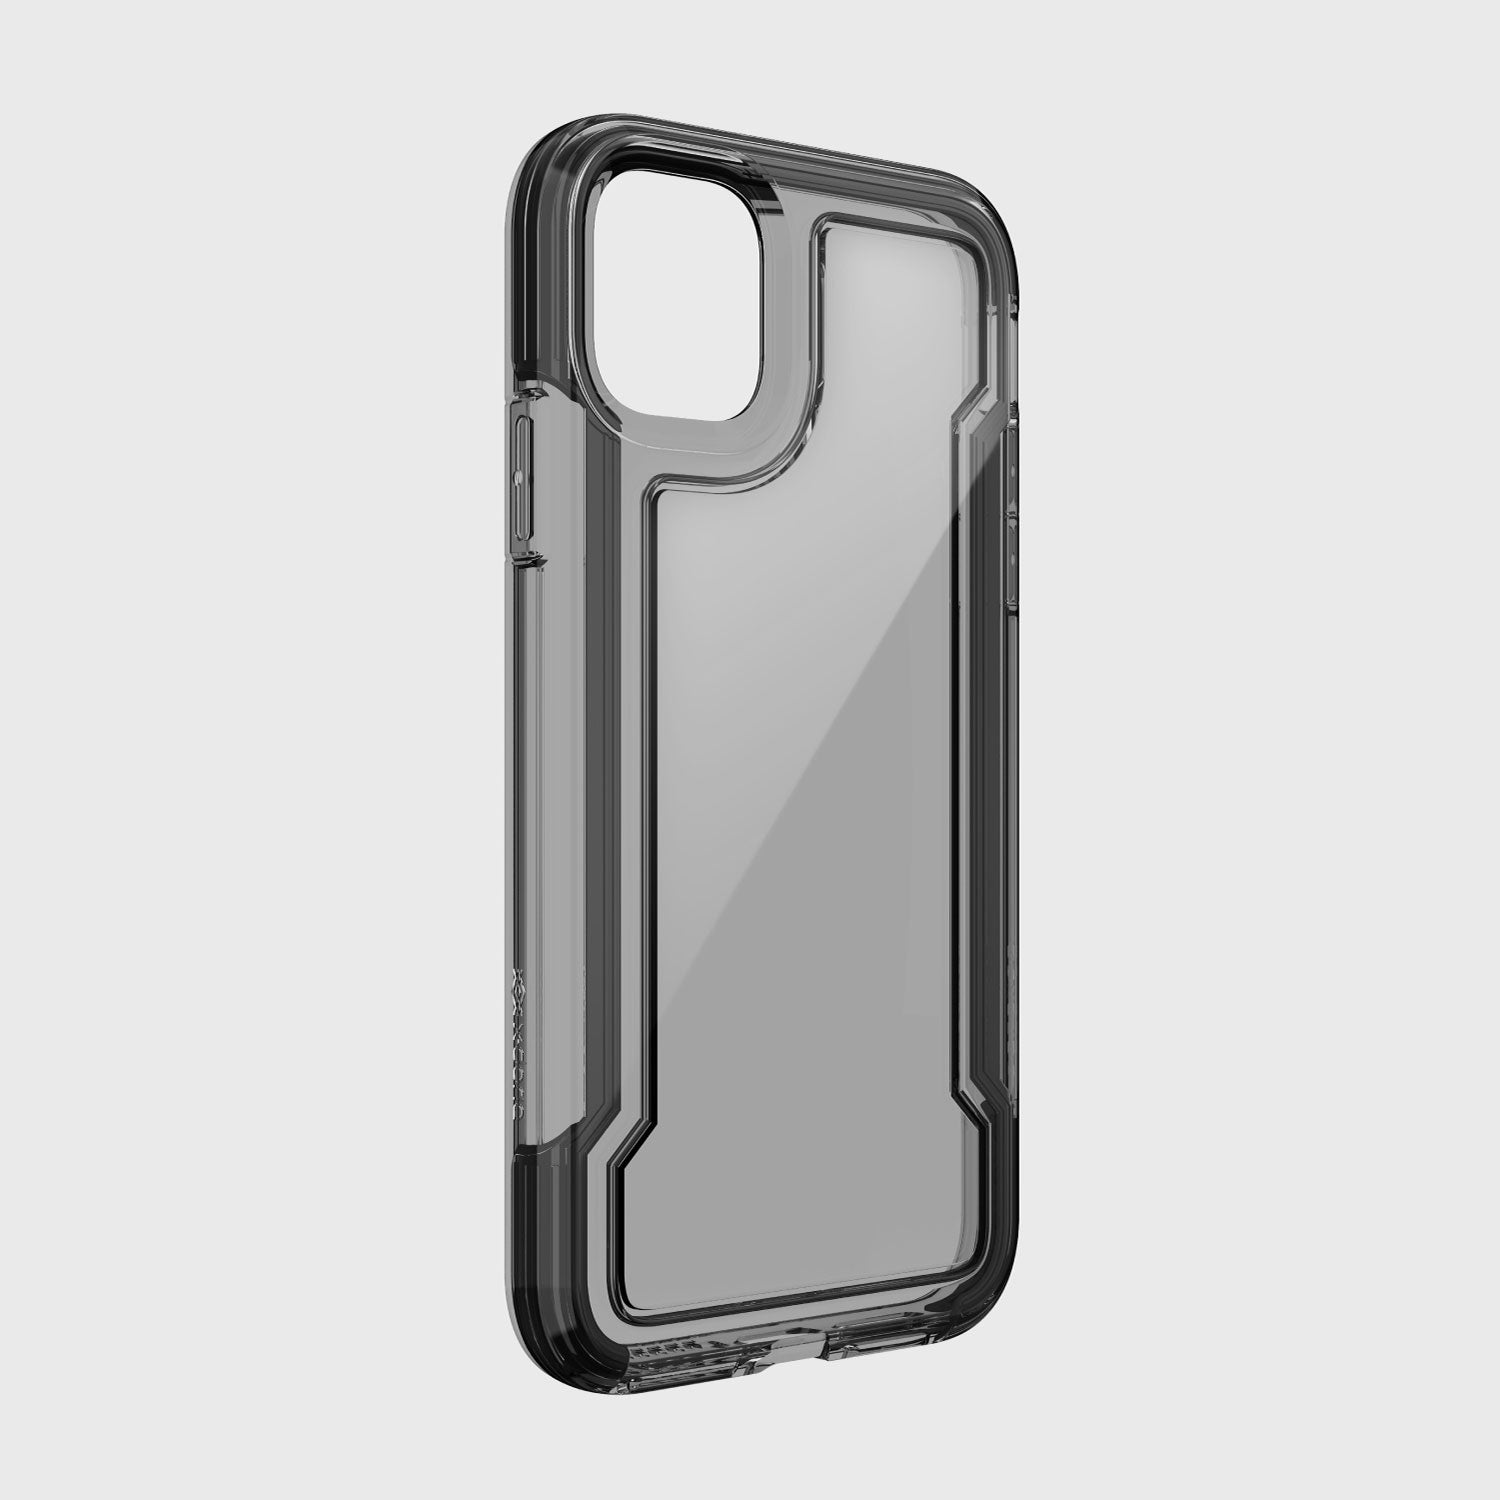 iPhone 11 Pro  Max Case - CLEAR